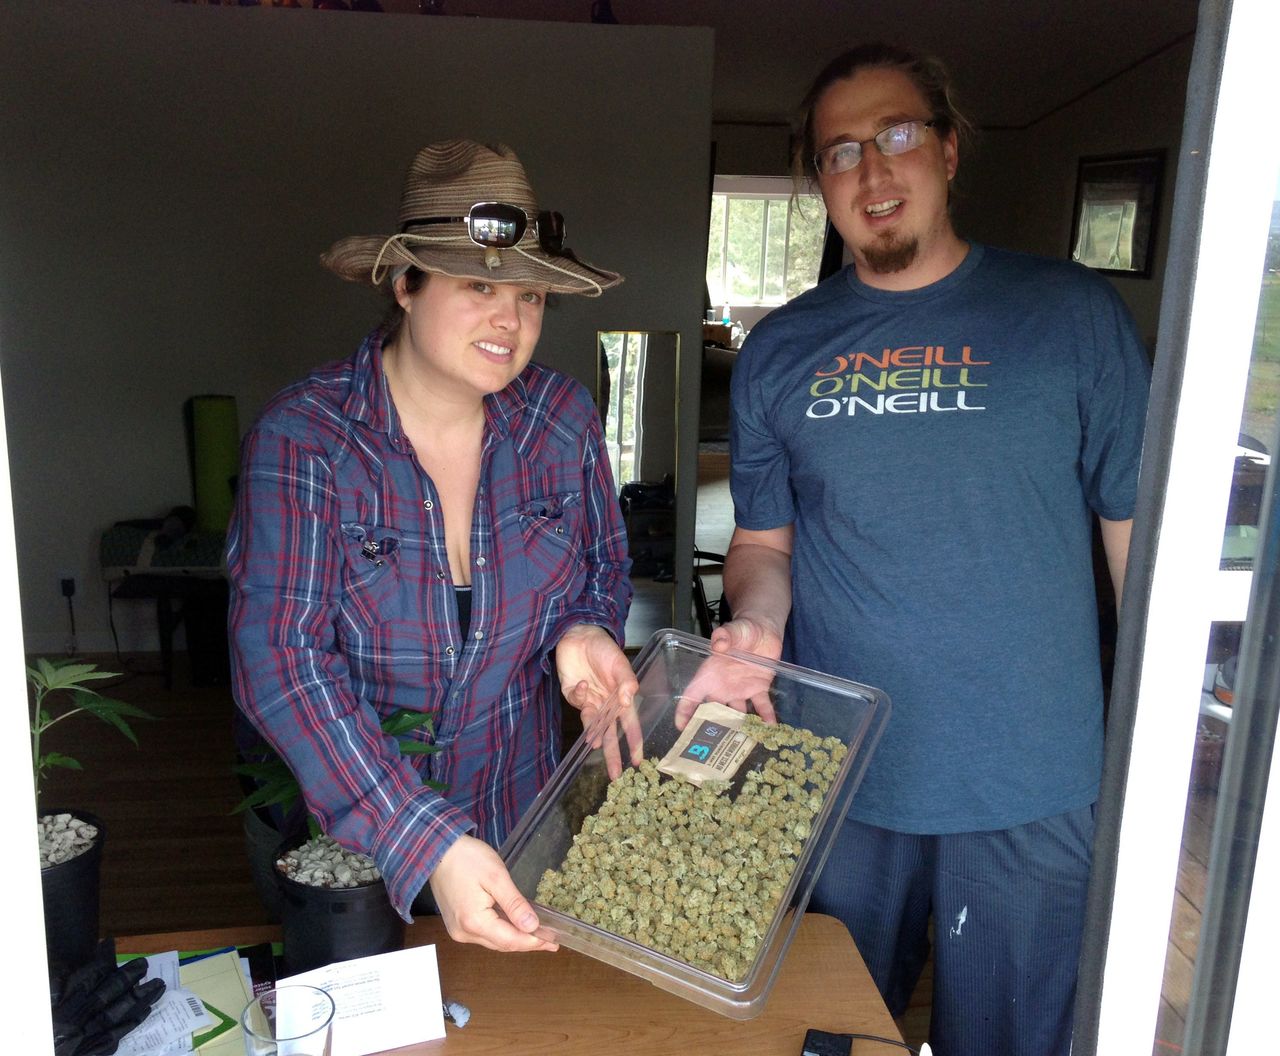 Marijuana growers Christopher and wife Lindsey Pate, licensed cannabis providers in the state of Oregon that produce medical cannabis, hold a tray of their marijuana in Redmond, Ore., on Thursday. Dozens of communities and about half of Oregon’s counties have banned recreational pot shops as allowed under state law, but a group of pot activists are asking voters in two counties on May 17 to overturn the opt-outs. More communities and counties will be voting on similar measures in the general election in November.